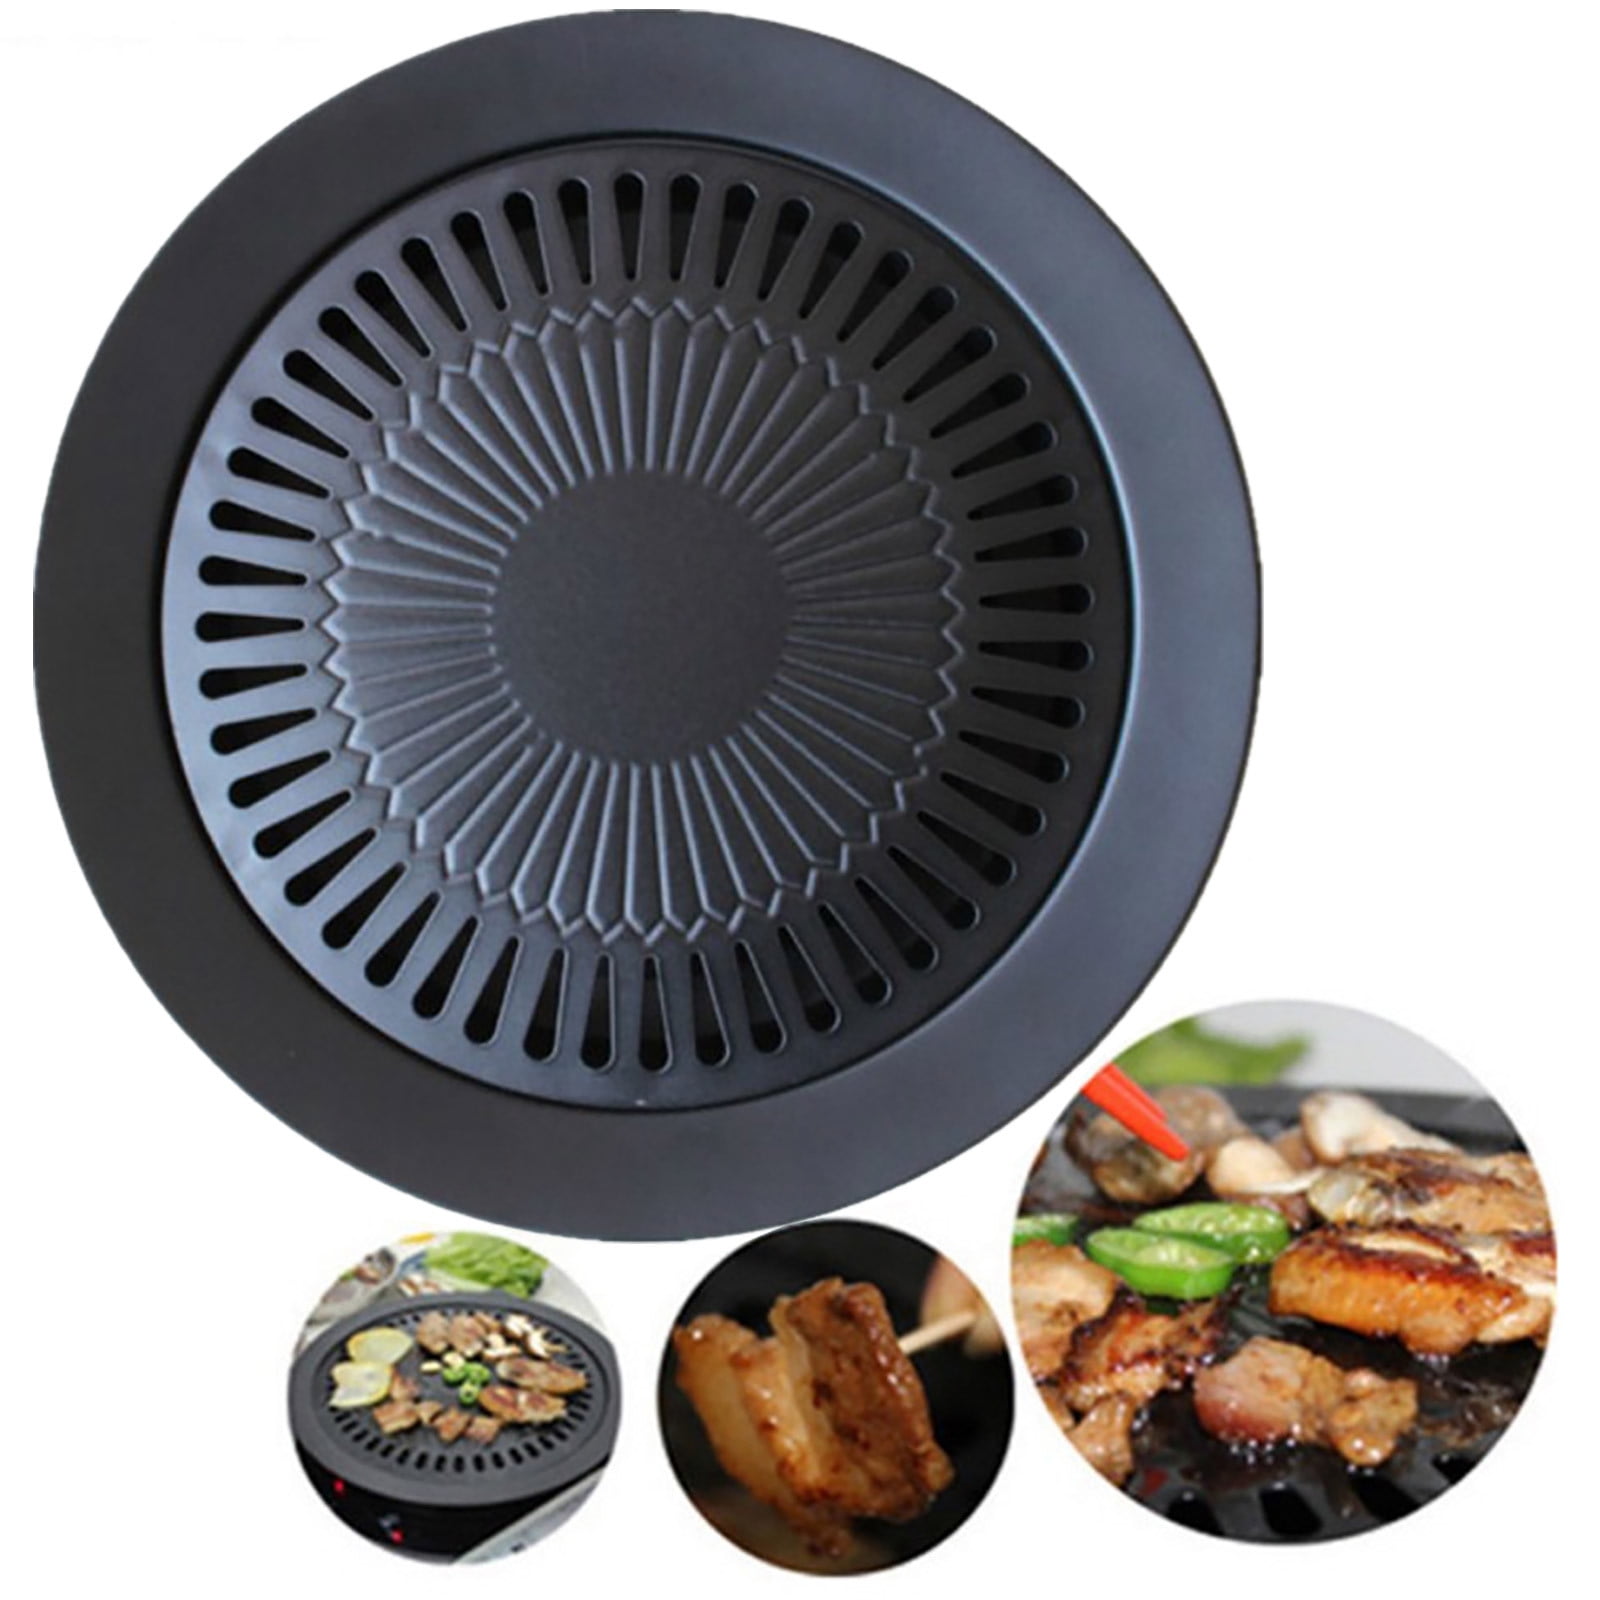 Vikakiooze Grill Pans For Stove Tops Round Iron Korean Bbq Grill Plate  Barbecue Set Non-Stick Pan Set With Holder Kitchen Appliances on